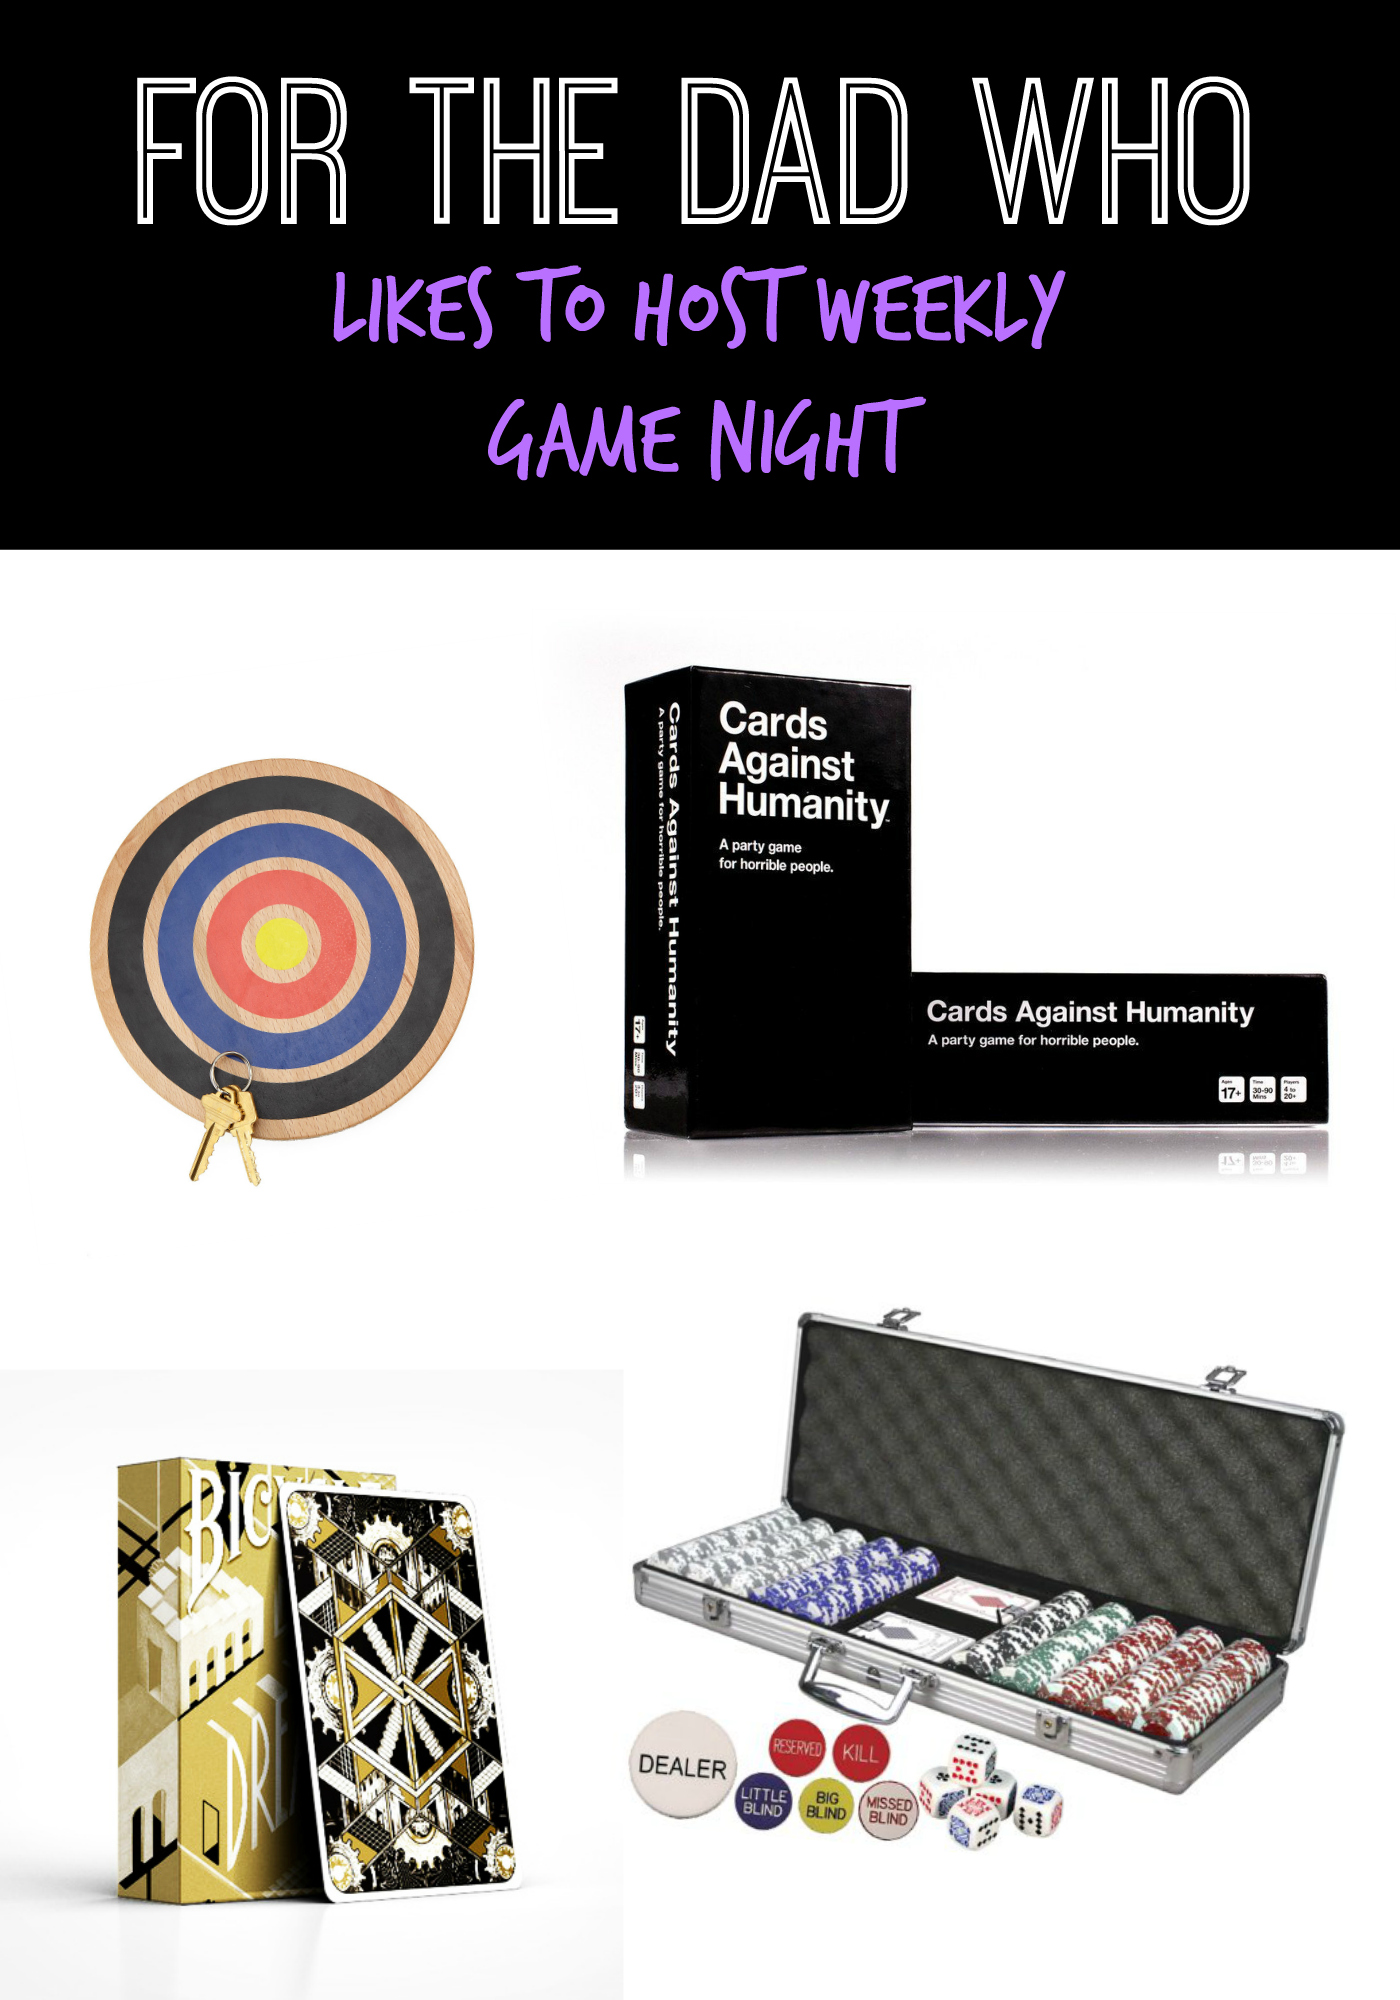 For the Dad Who Likes to Host Weekly Game Night